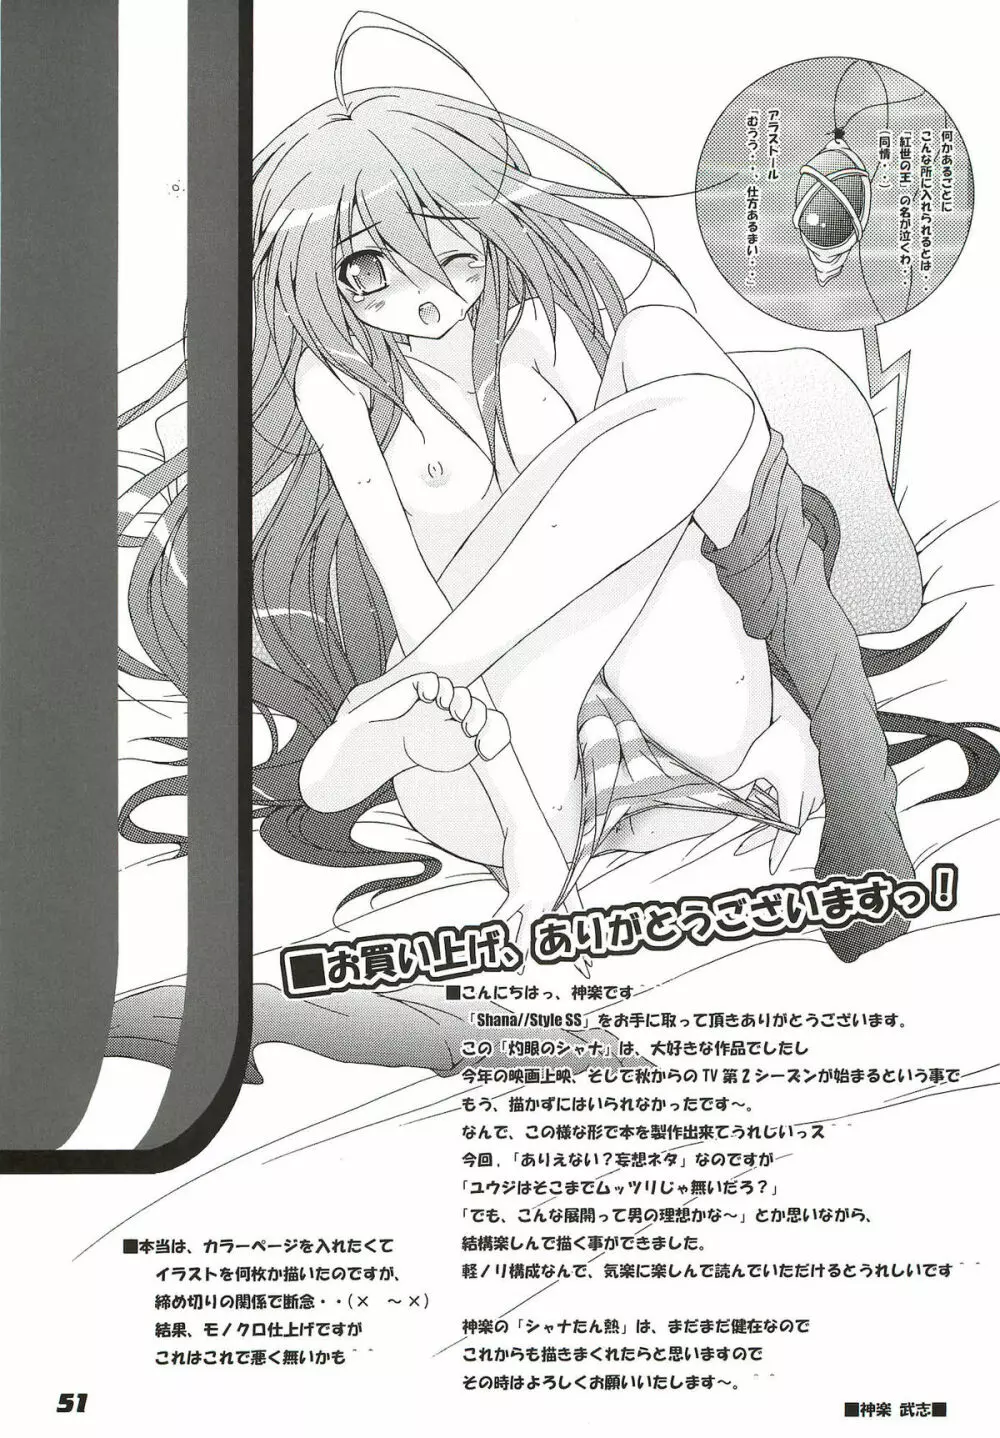 La Collection -Shana／／Style- Page.51